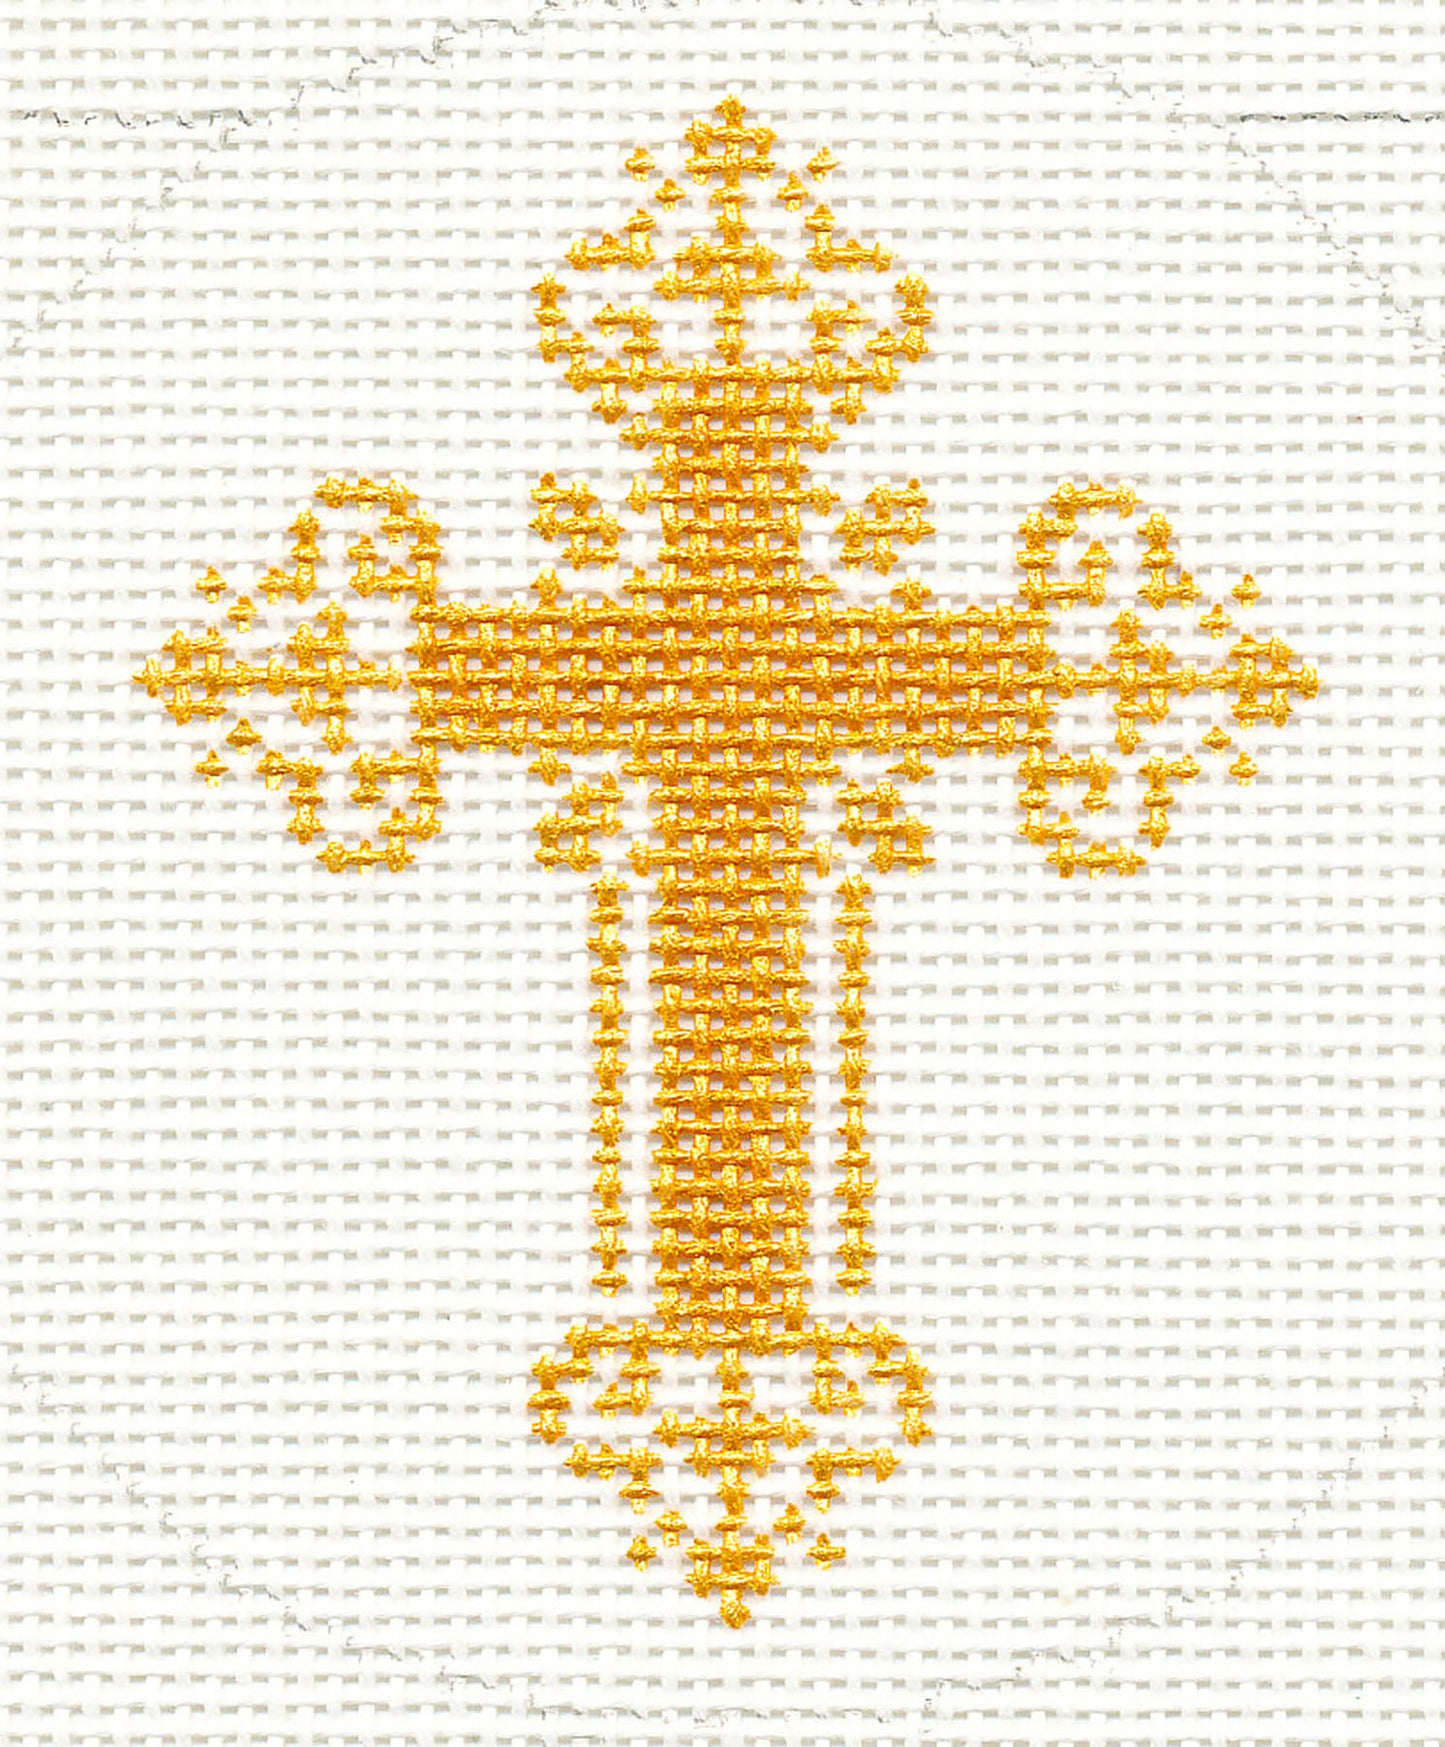 Cross ~ Metallic Gold Filigree CROSS handpainted Needlepoint Canvas 3" Rd. Ornament or Insert by LEE